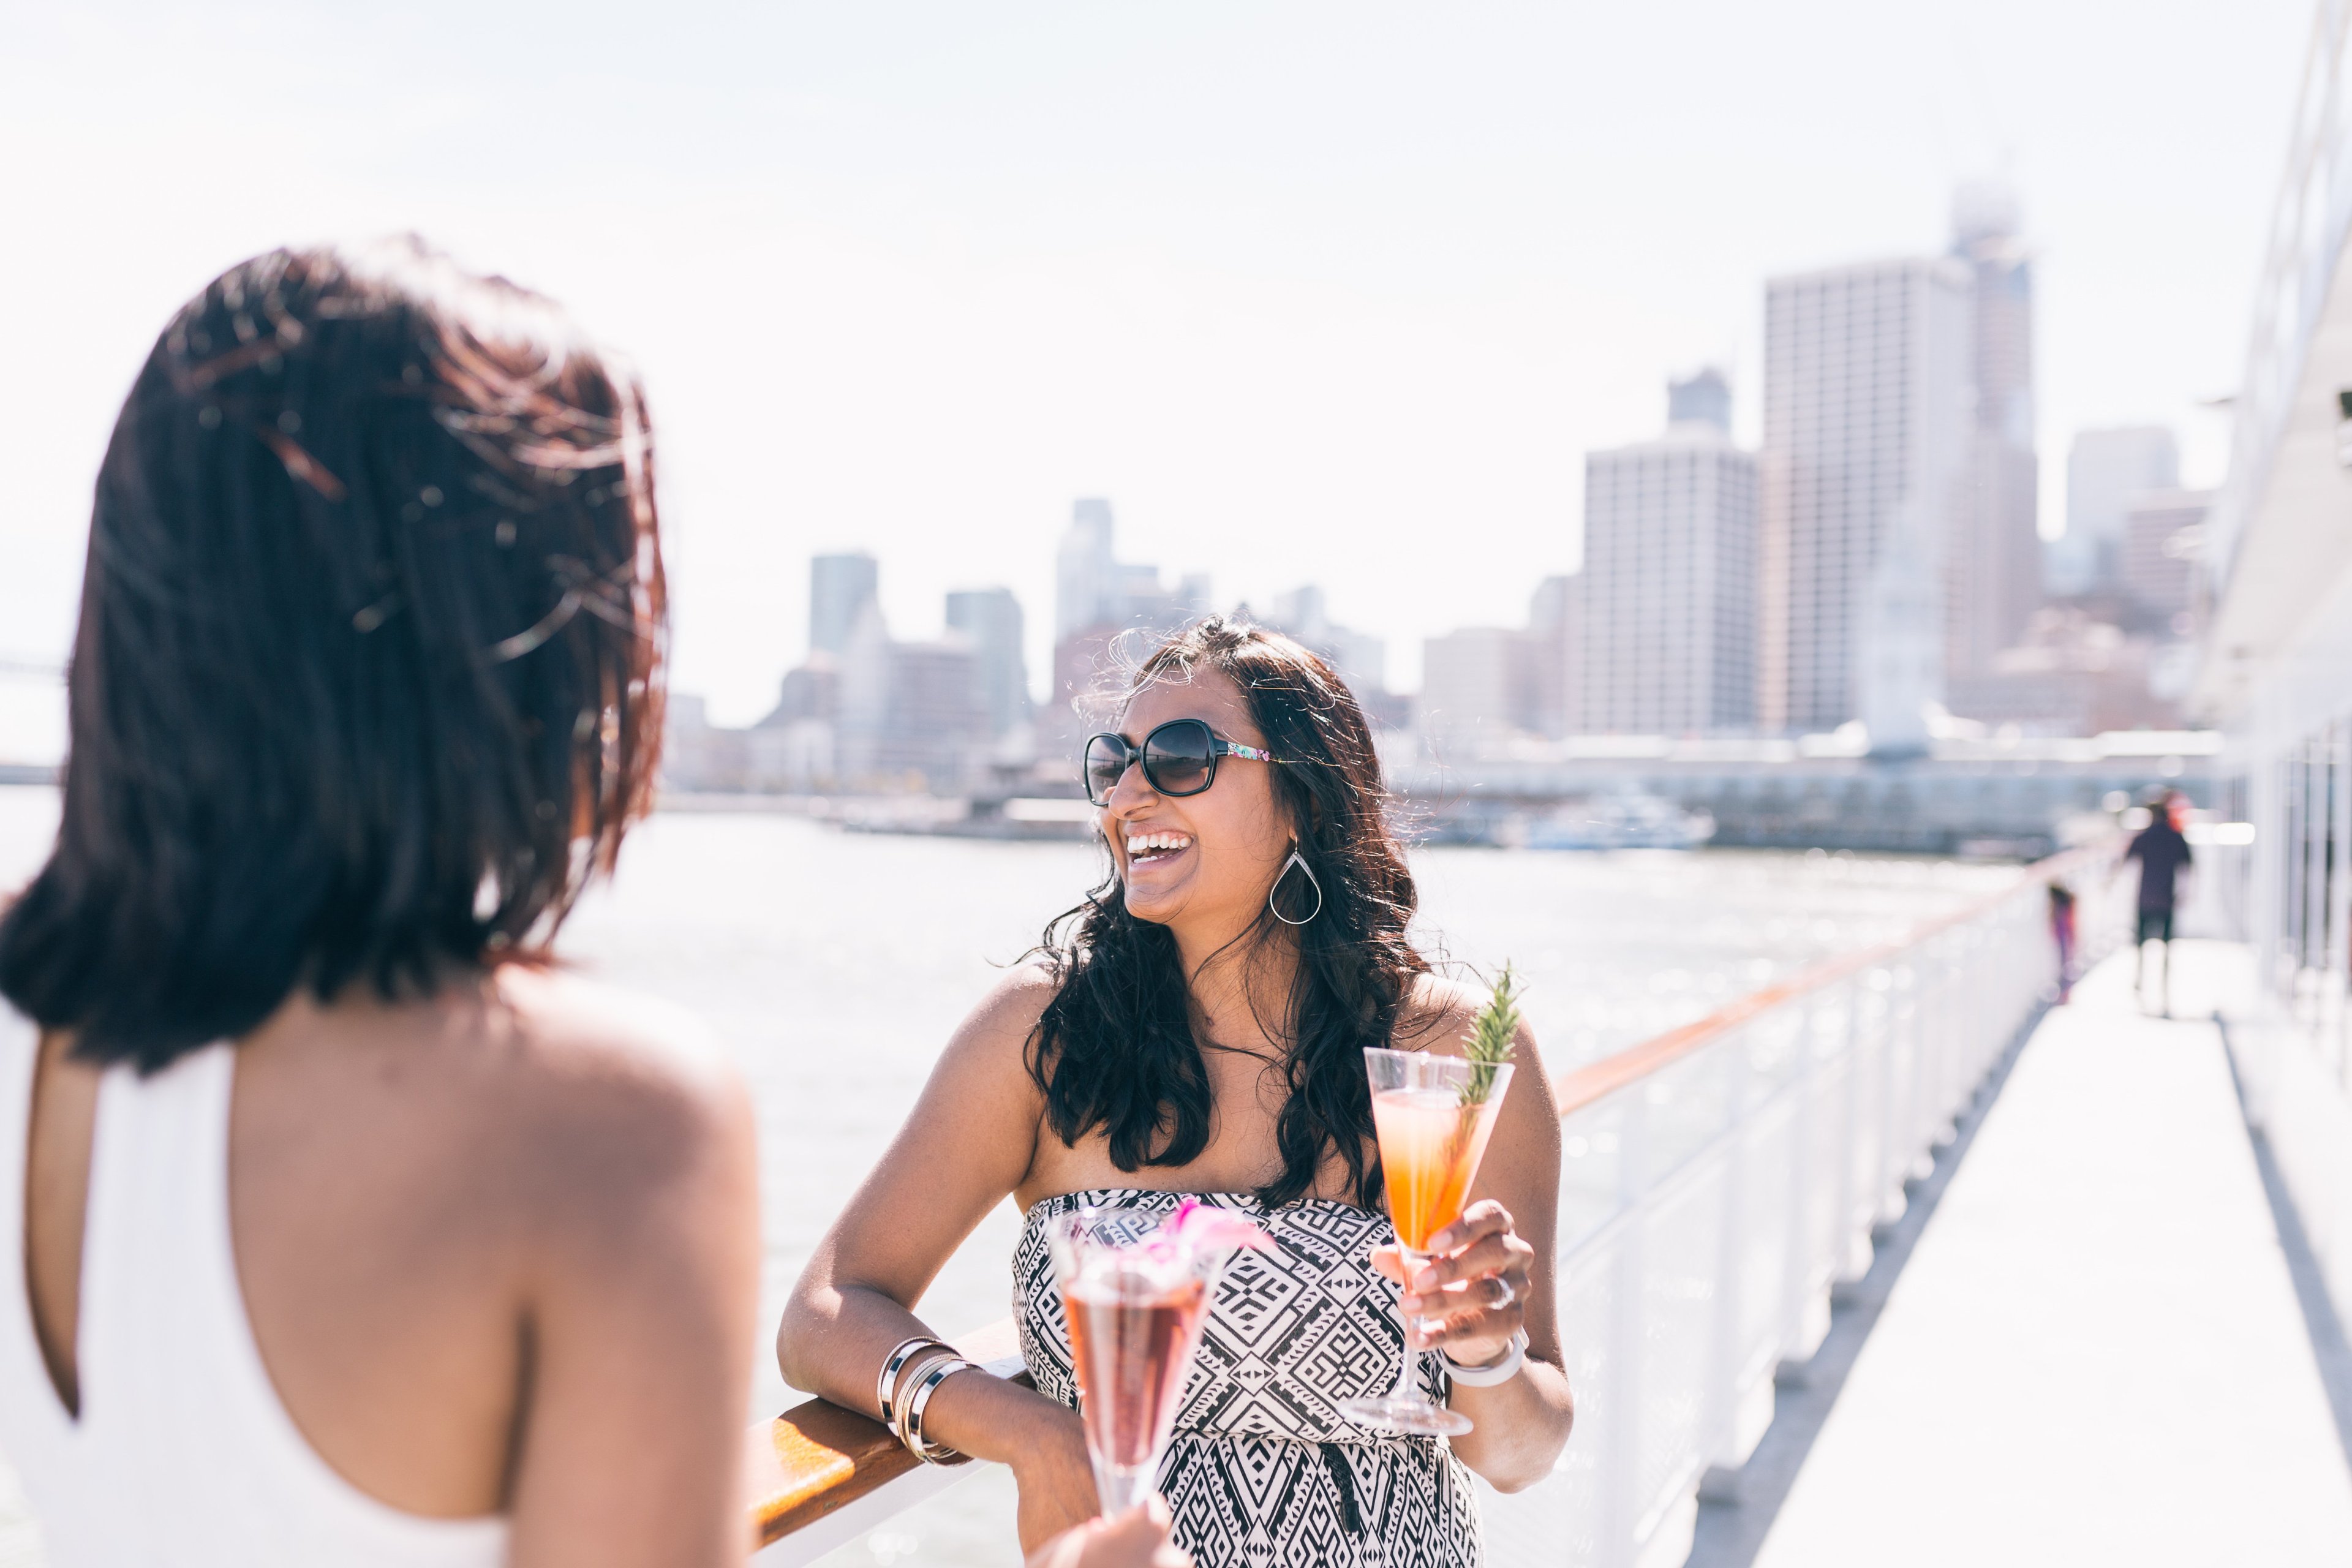 Two women on a boat with drinks, one laughing with a city skyline in the background.